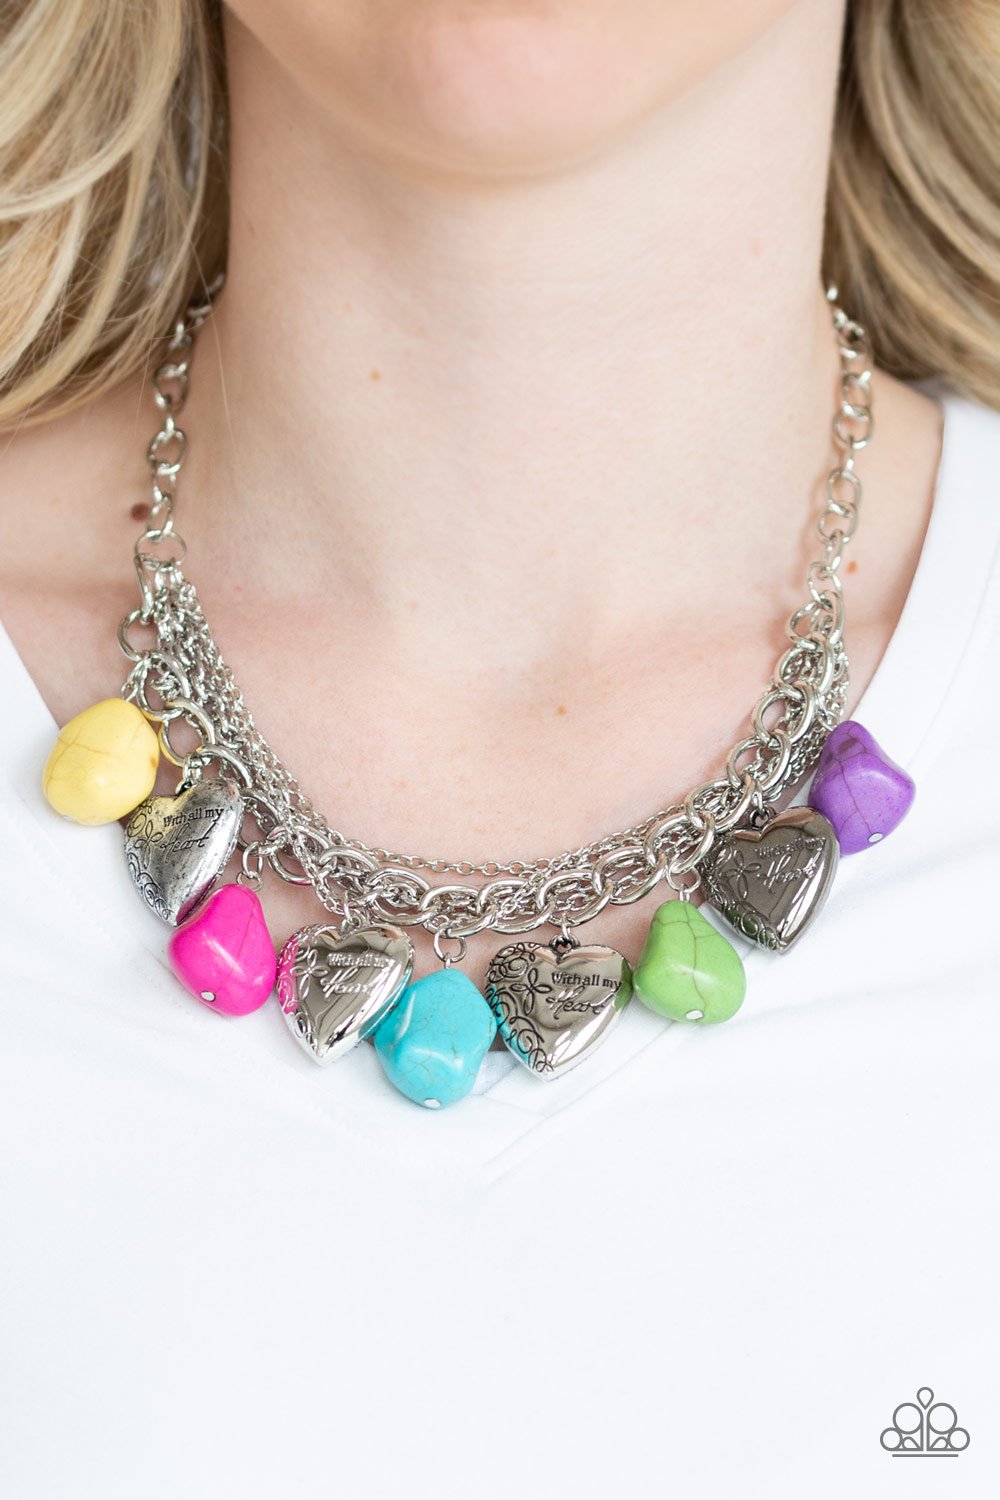 Change of Heart - Multi Necklaces